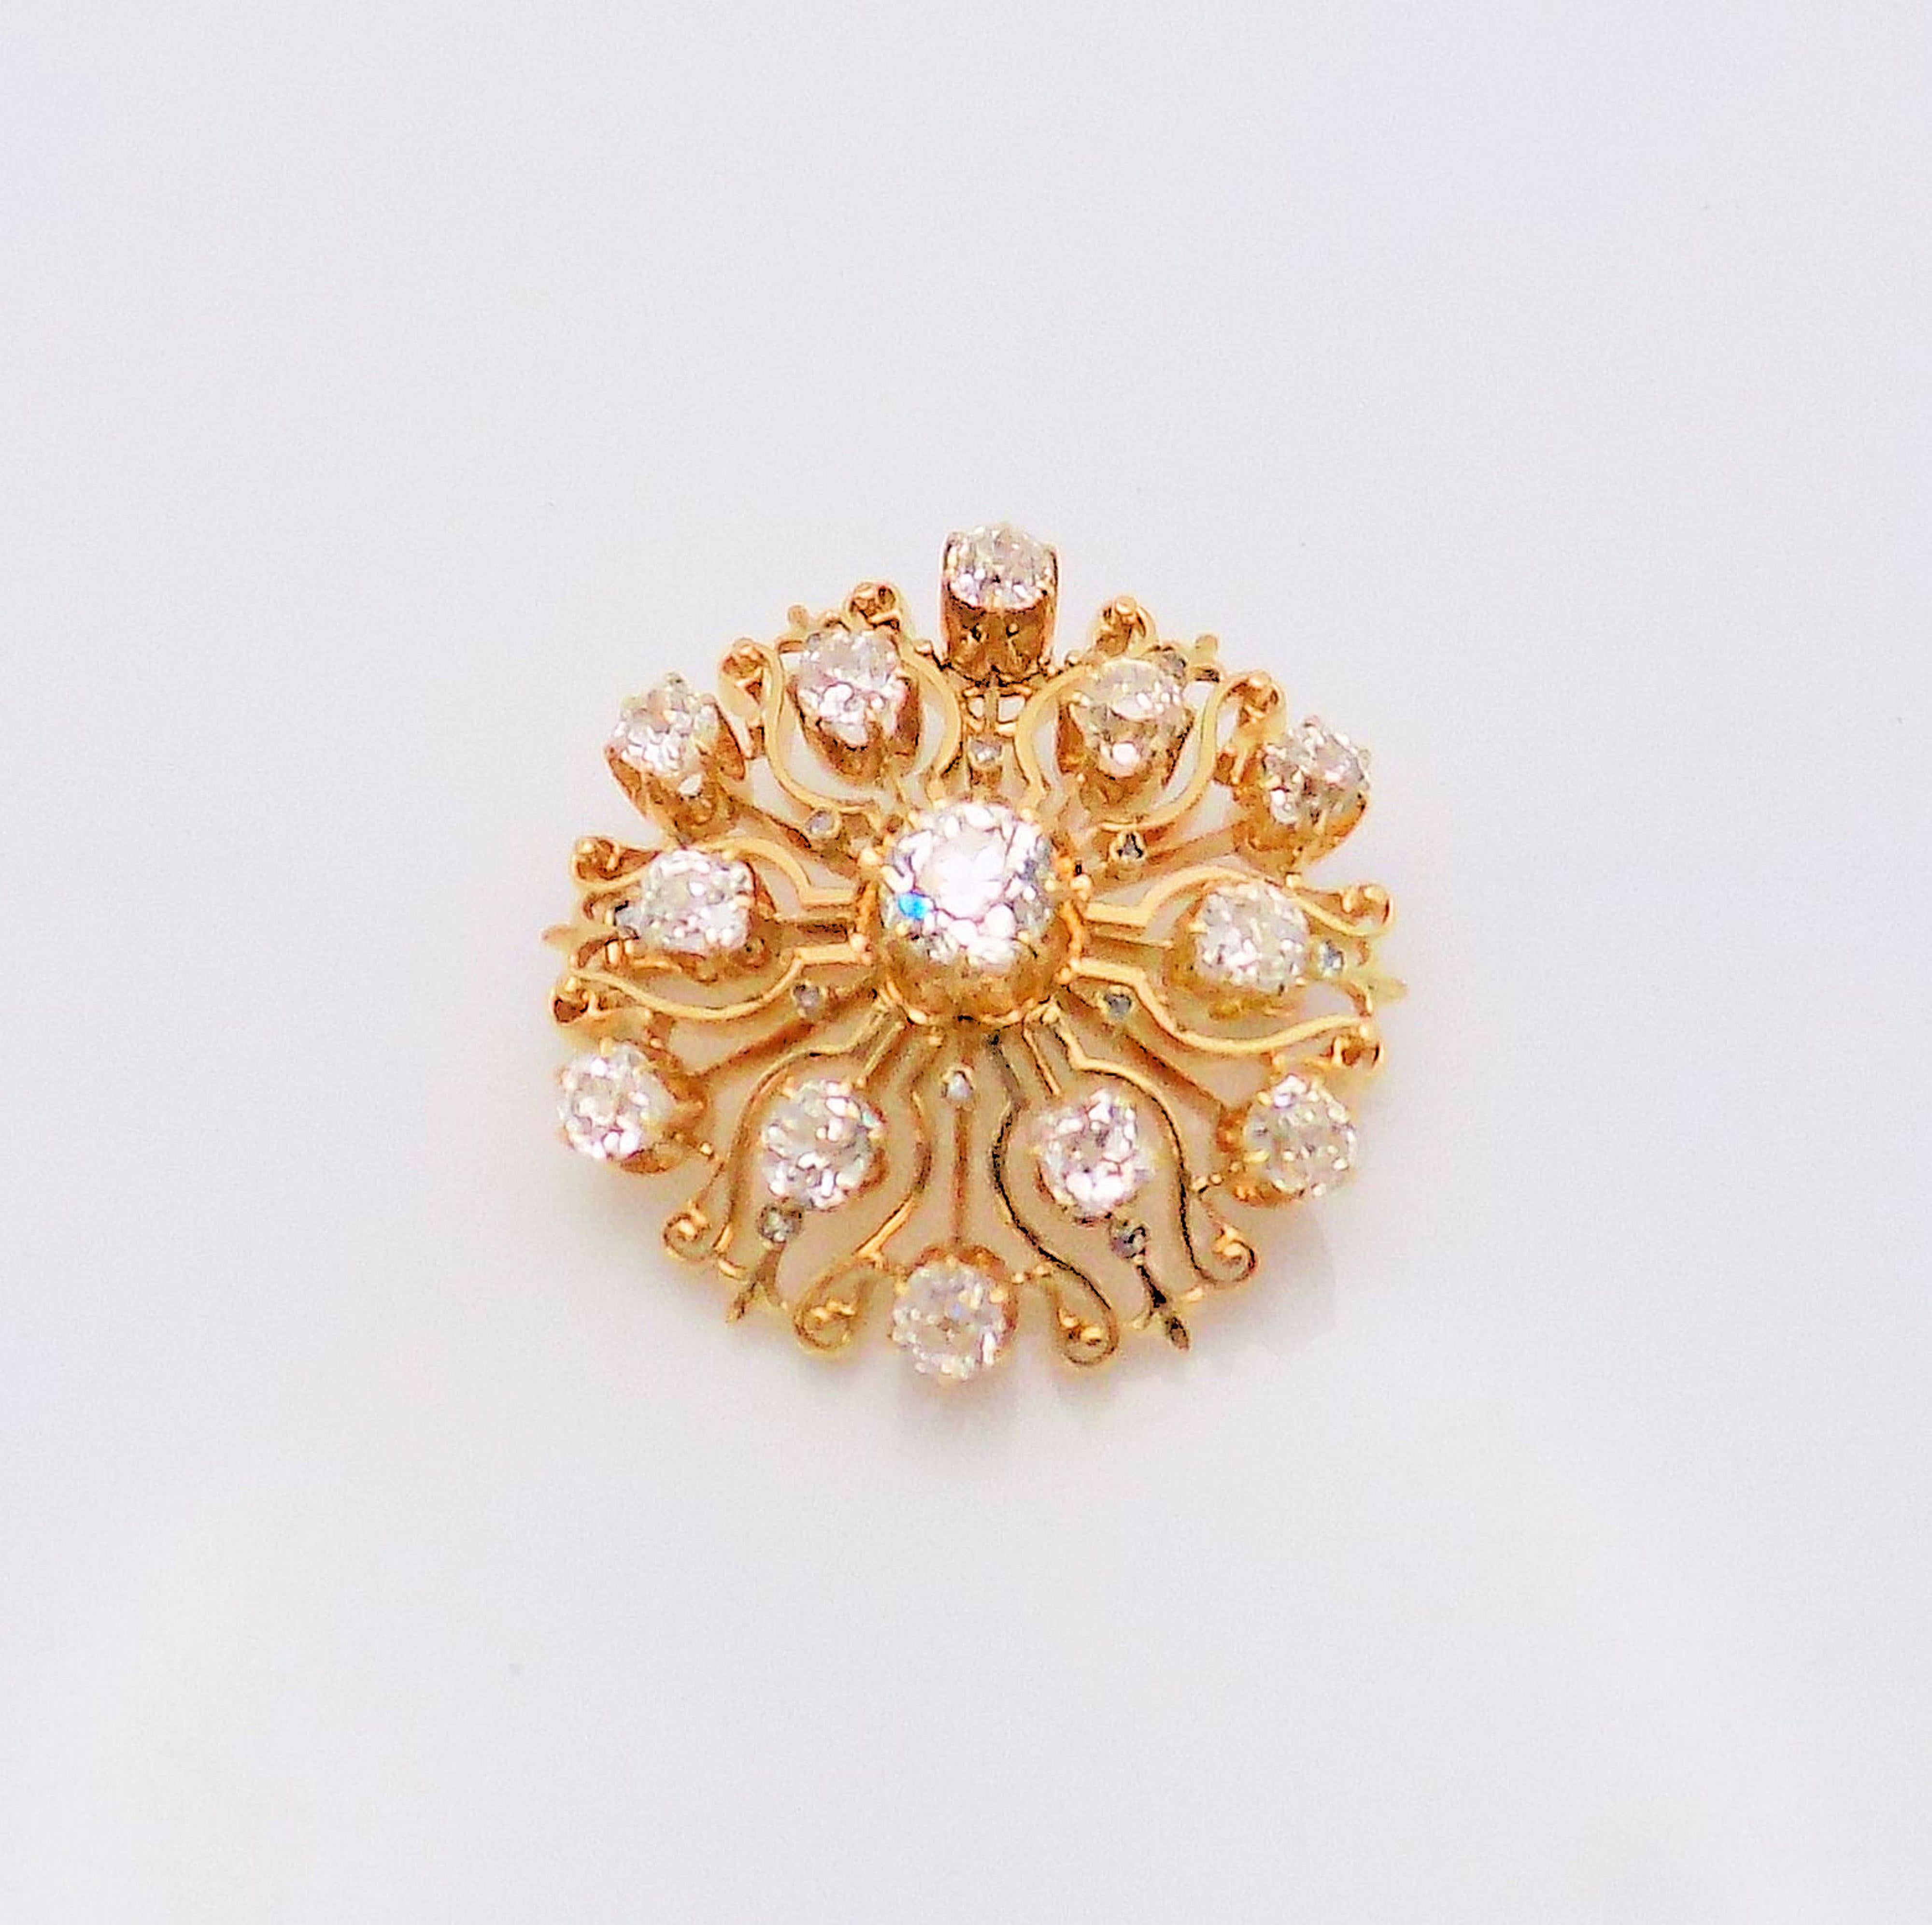 Stunning and Classic is this 18 Karat Yellow Gold Antique Brooch featuring 13 Old Mine Cut Diamonds 3.40 Carat Total Weight, VS-SI, H-I; 1.25 inch diameter; 10.7 DWT or 16.64 Grams.